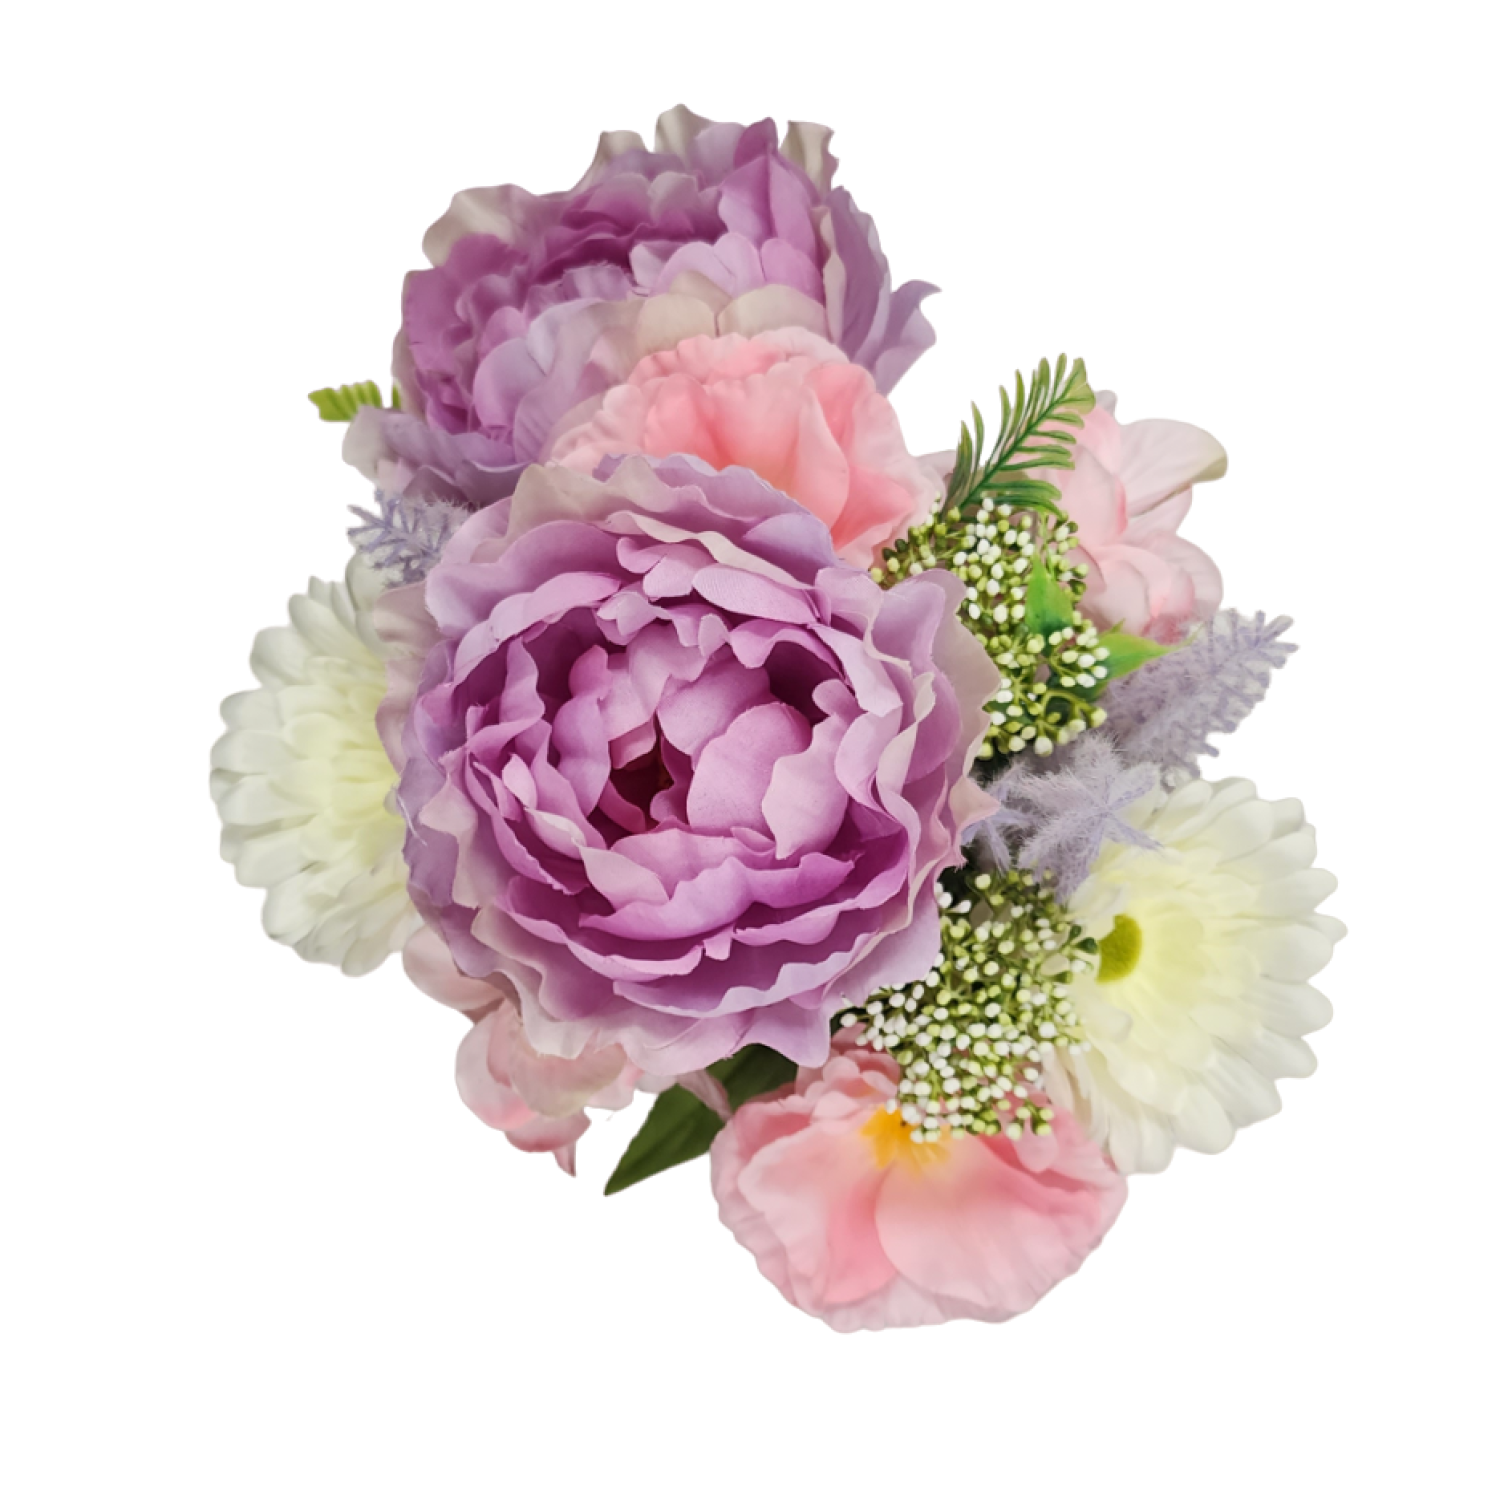 Mainstays Artificial Pink Mixed Peony & Hydrangea 17 in Tall Spring Indoor Bouquet - image 5 of 8